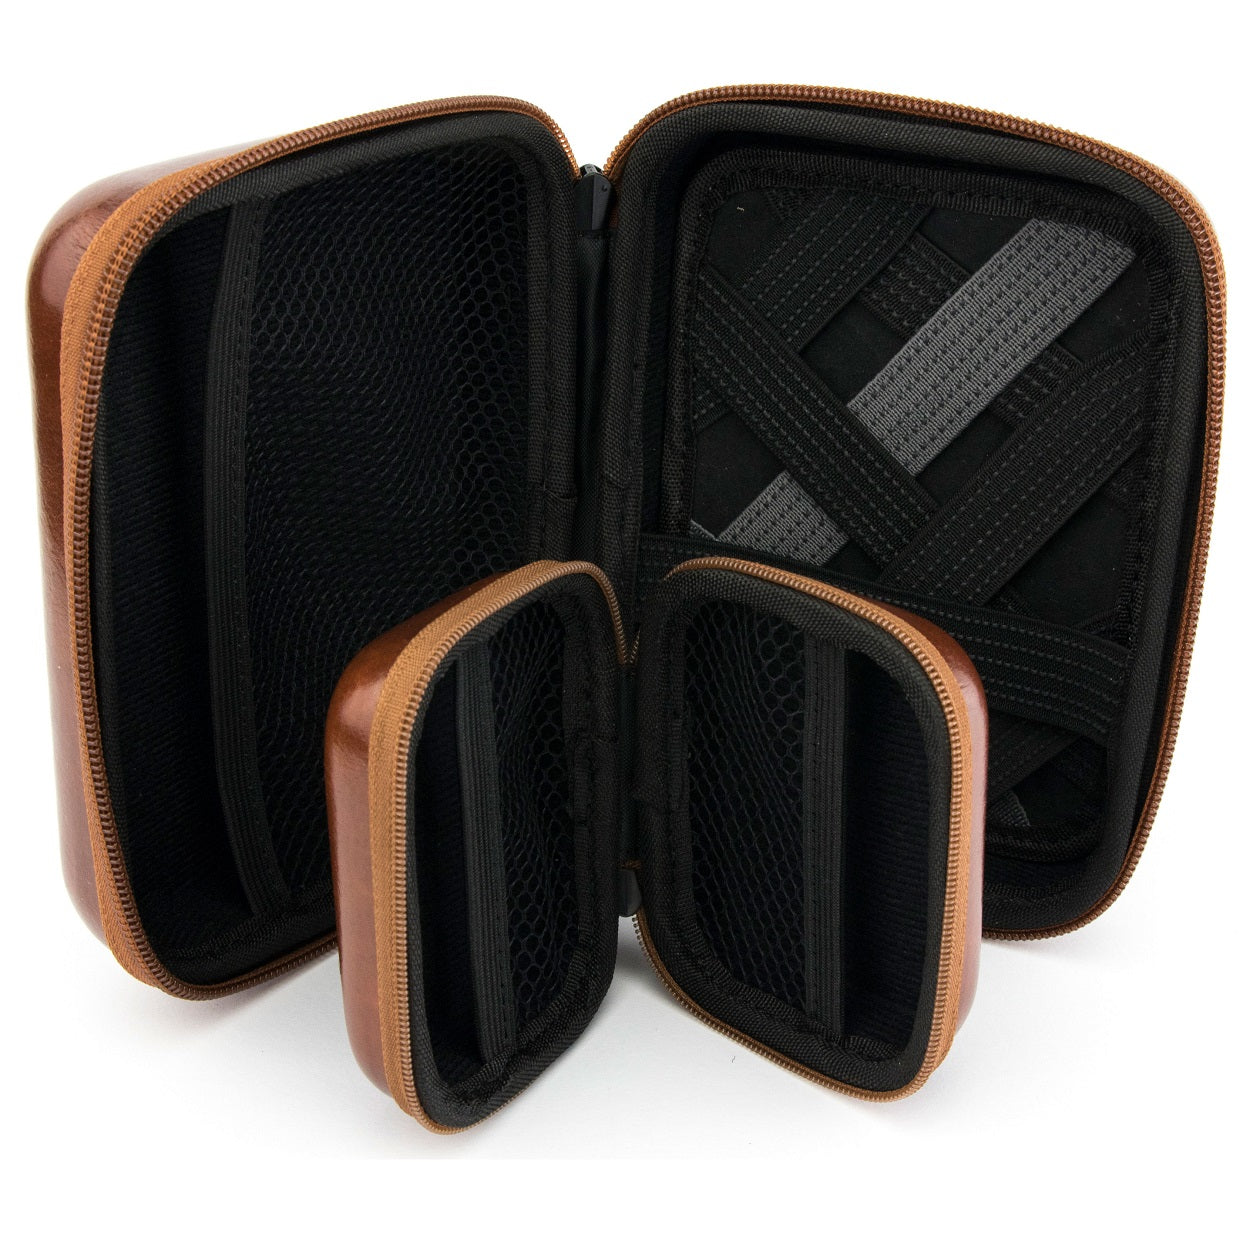 TROIKA Protective Organiser Cases with Zip ONPACK Brown-Set of 2